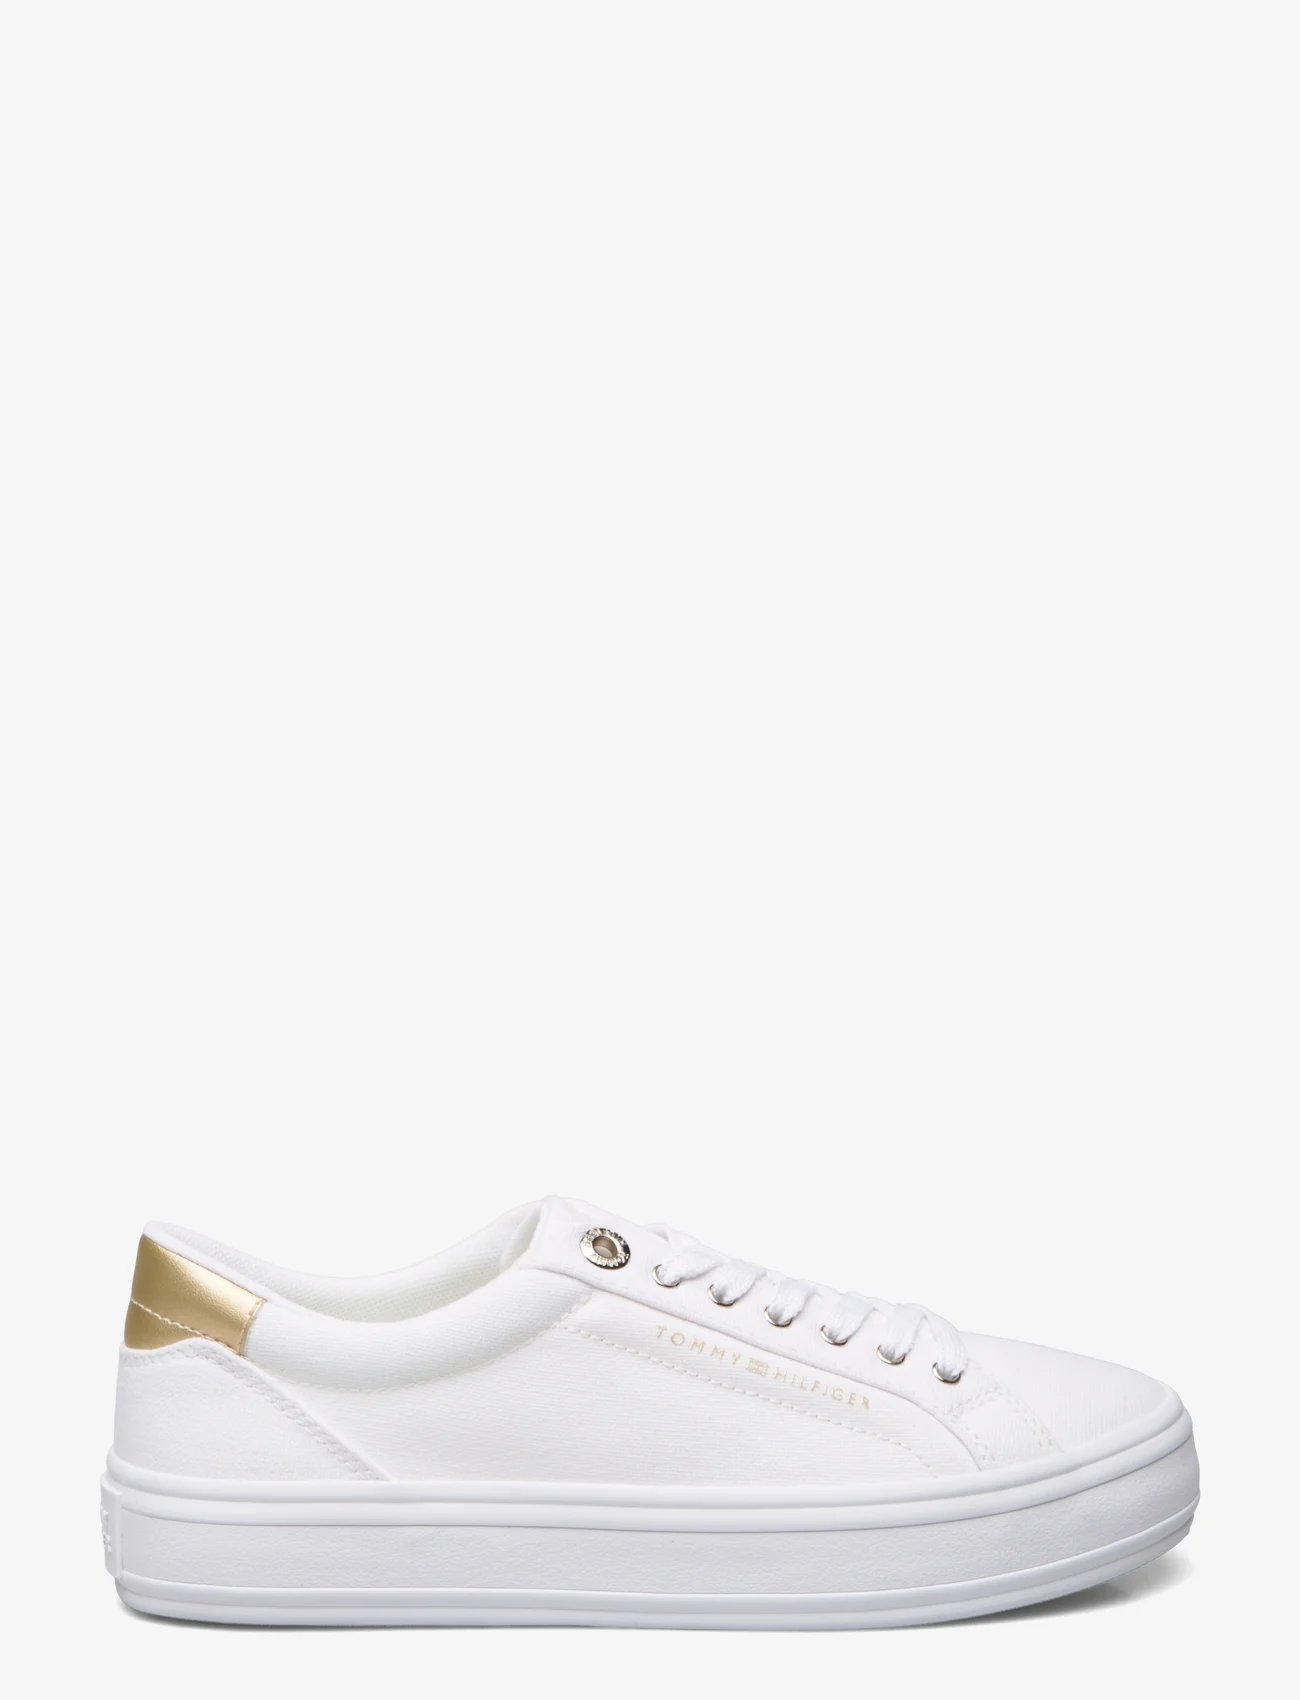 Tommy Hilfiger - ESSENTIAL VULC CANVAS SNEAKER - sneakers - white - 1